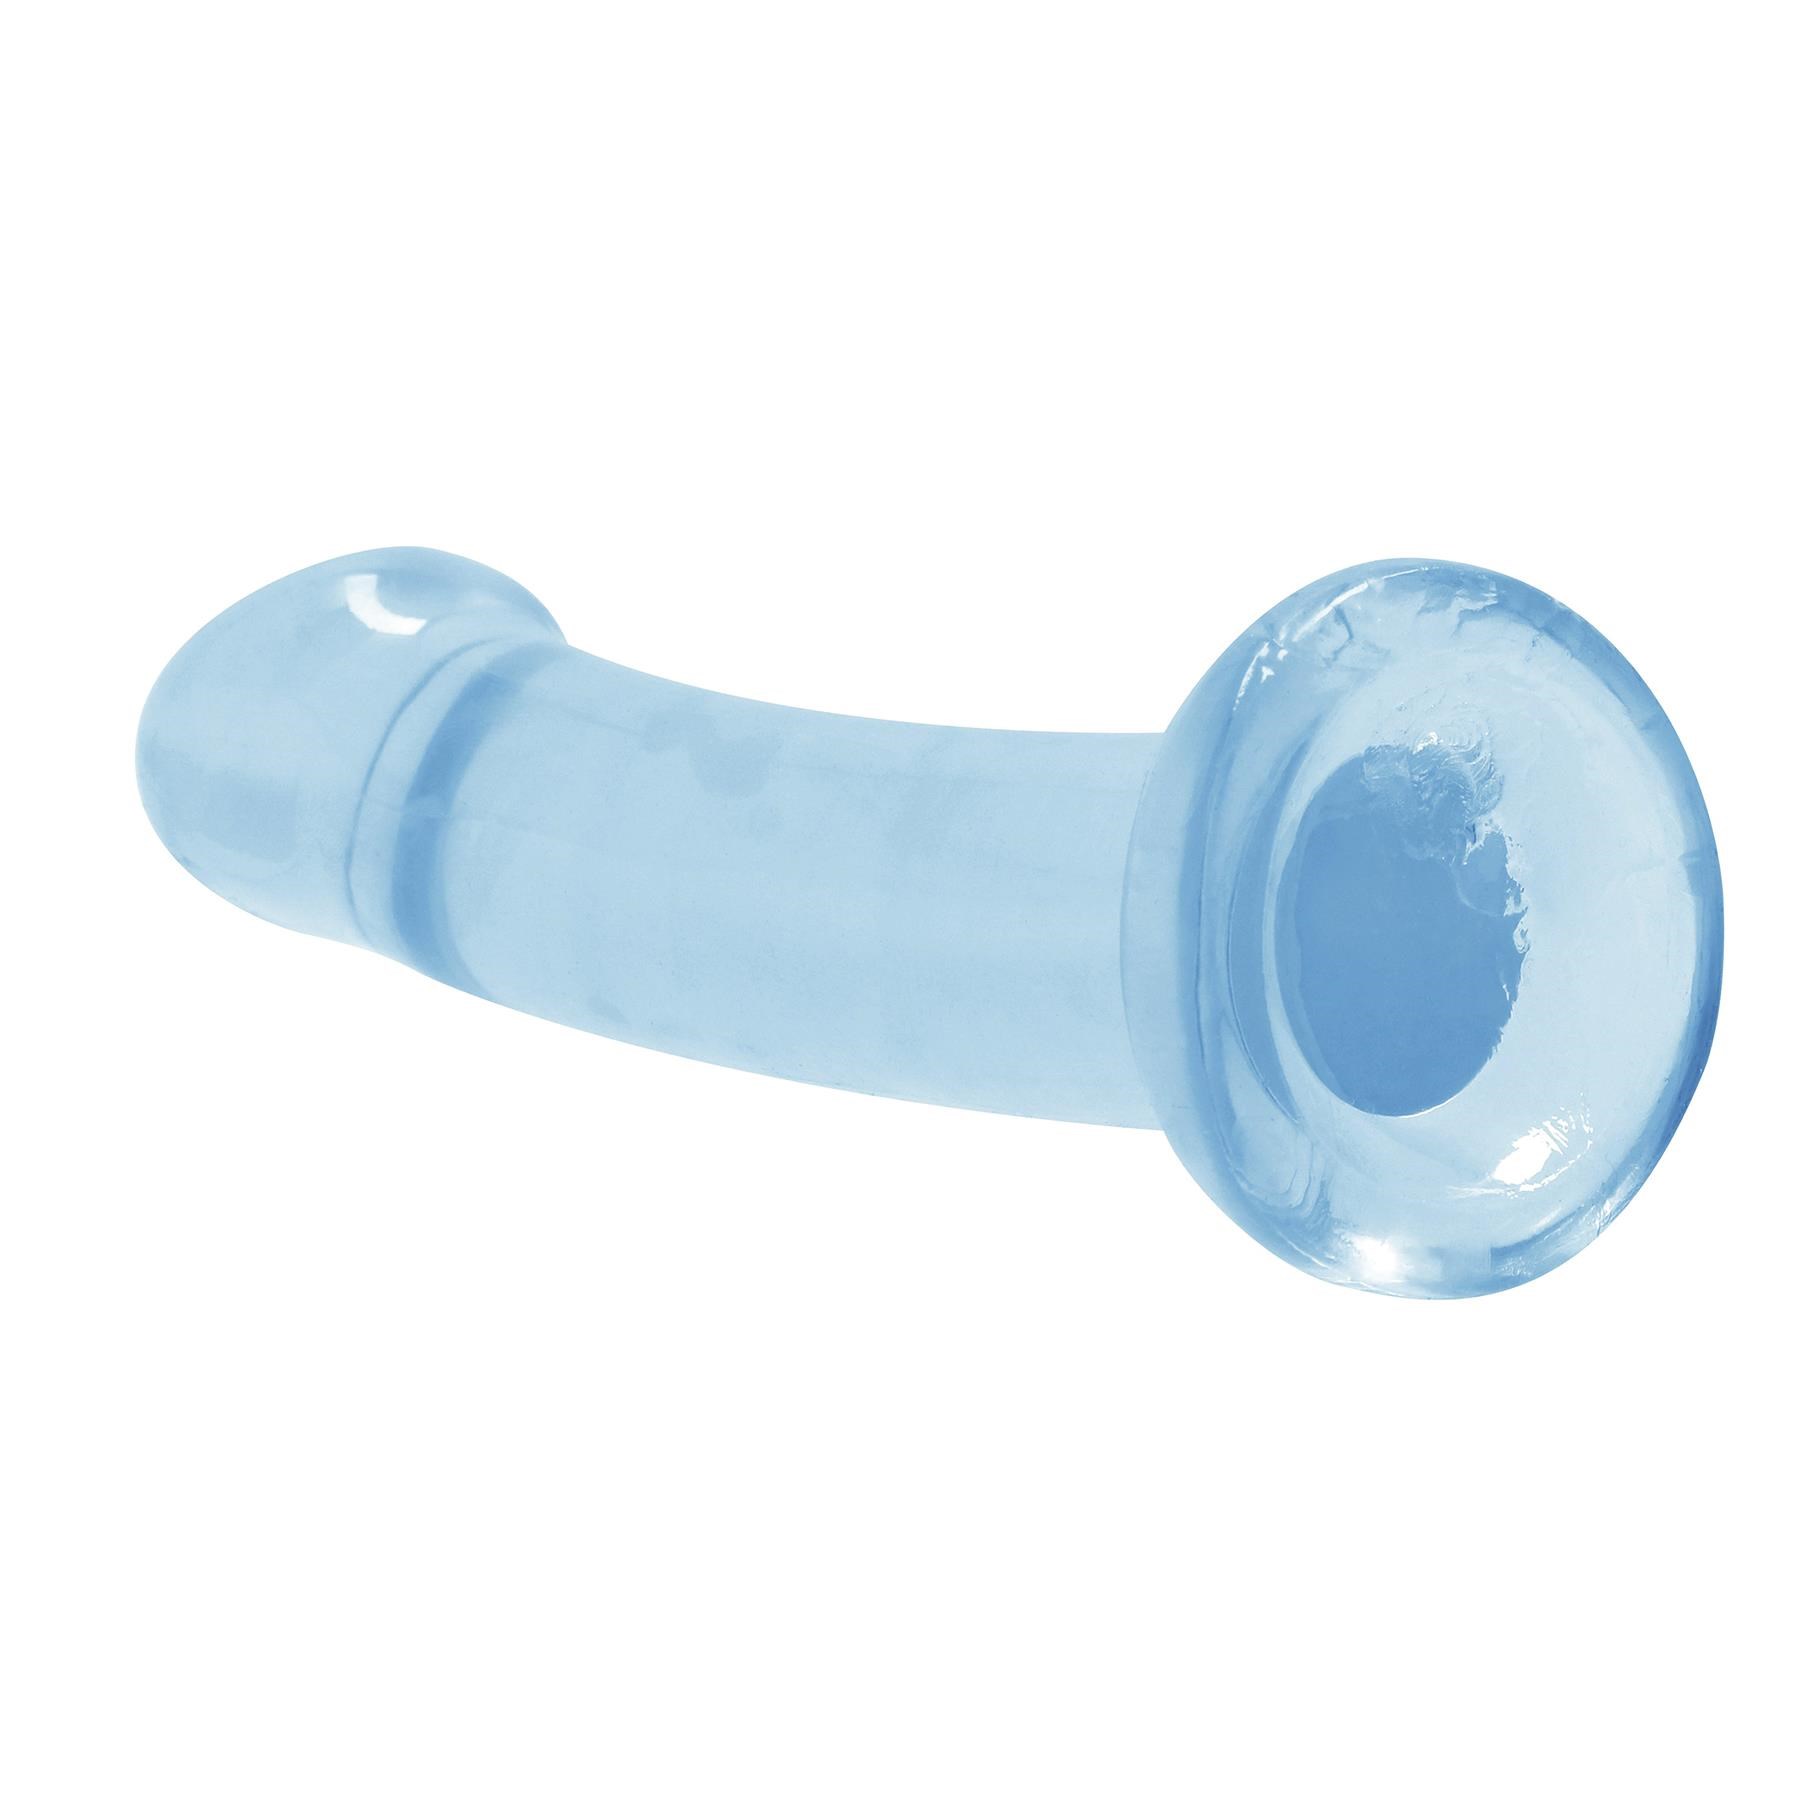 RealRock Non Realistic Dildo With Suction Cup - Product Shot #3